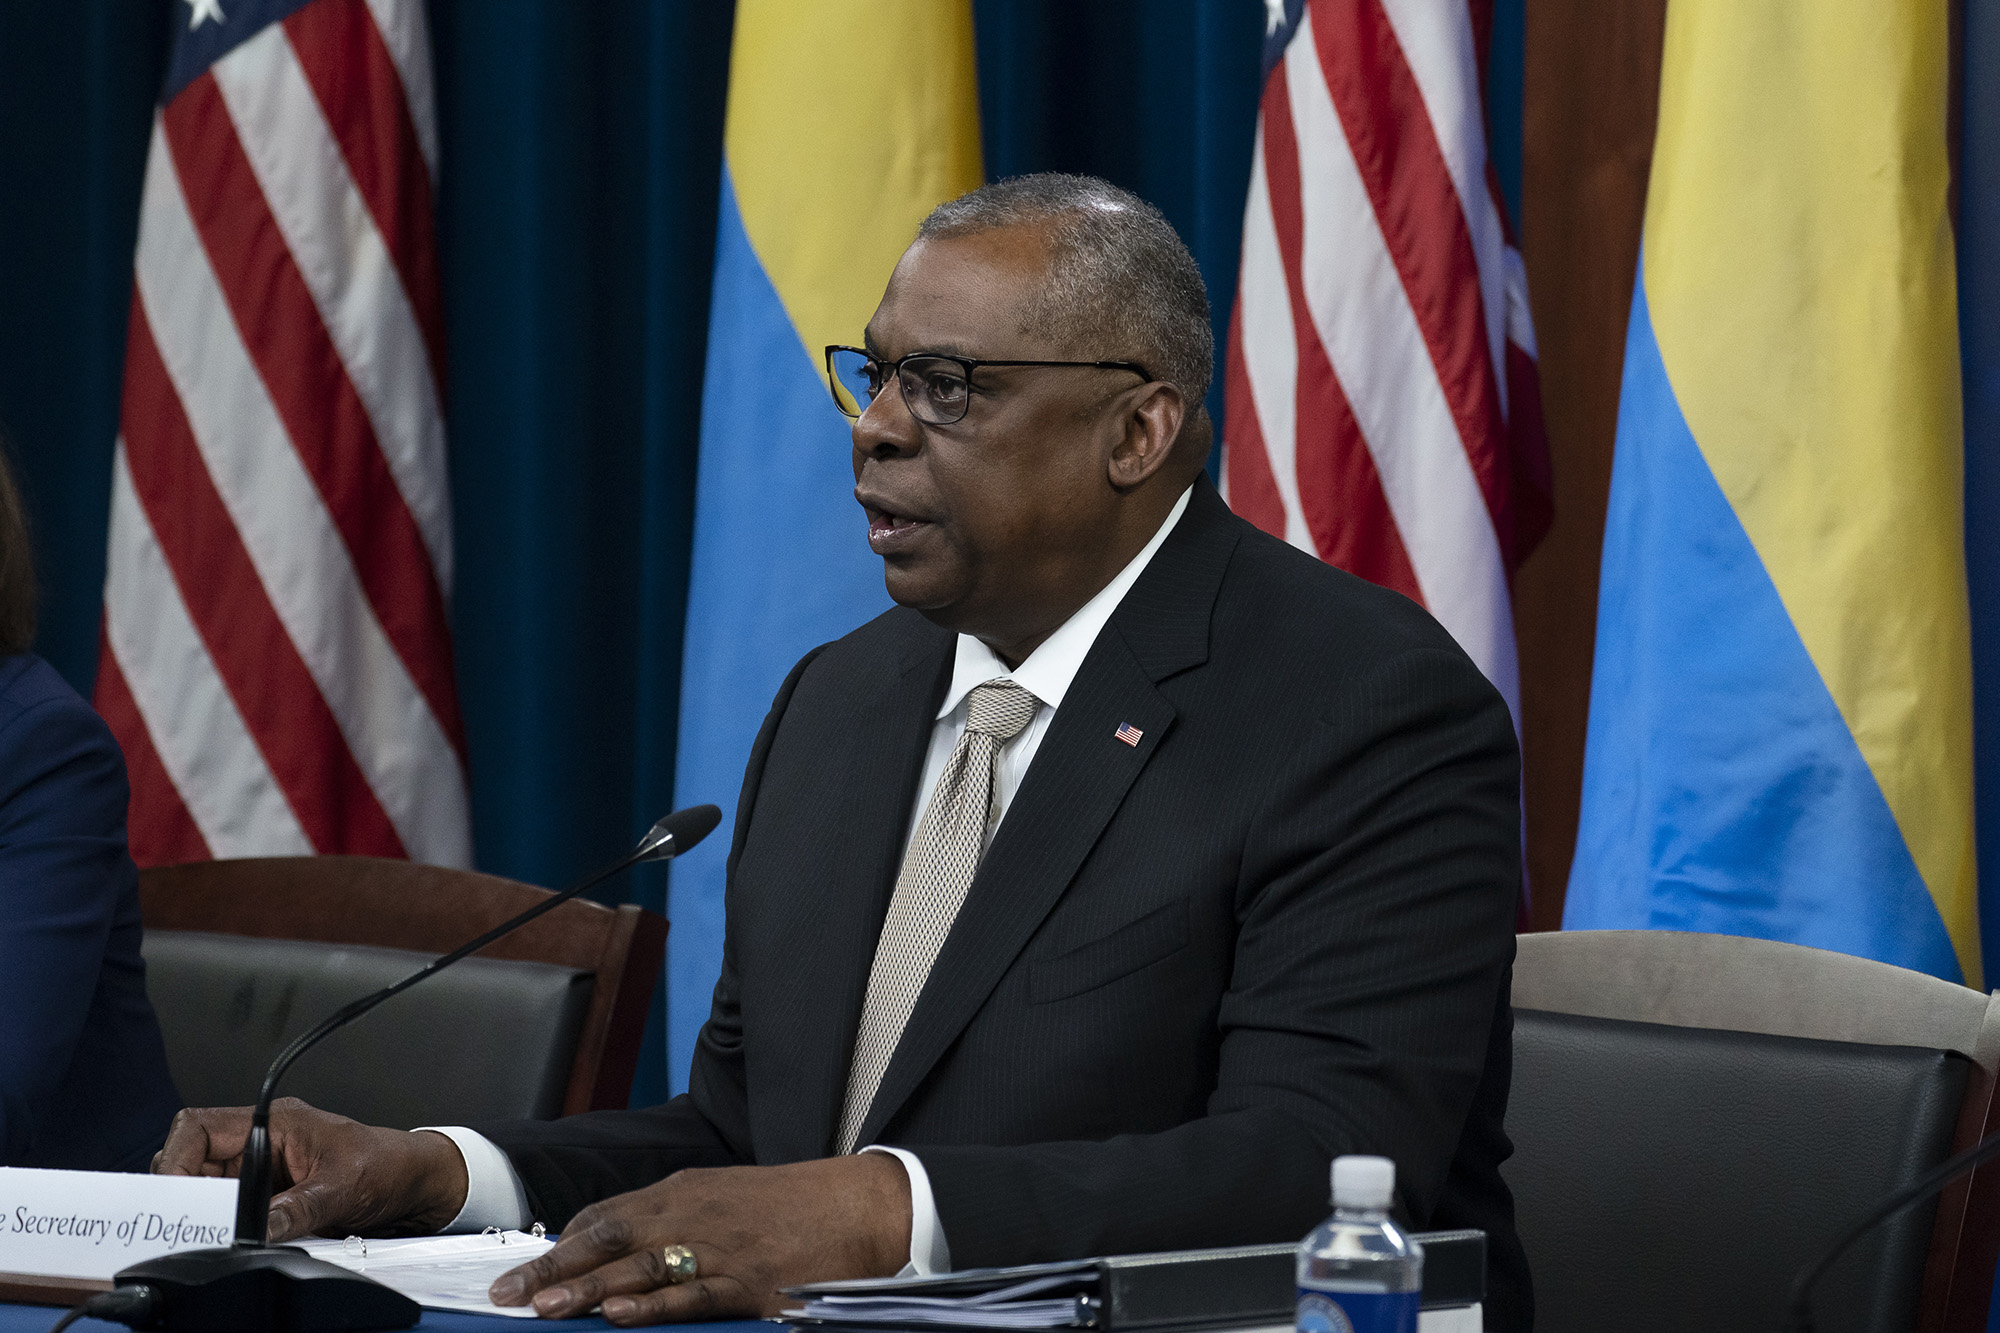 Secretary of Defense Lloyd Austin gives opening remarks at a virtual meeting of the Ukraine Defense Contact Group at the Pentagon, Washington D.C, on May 23.